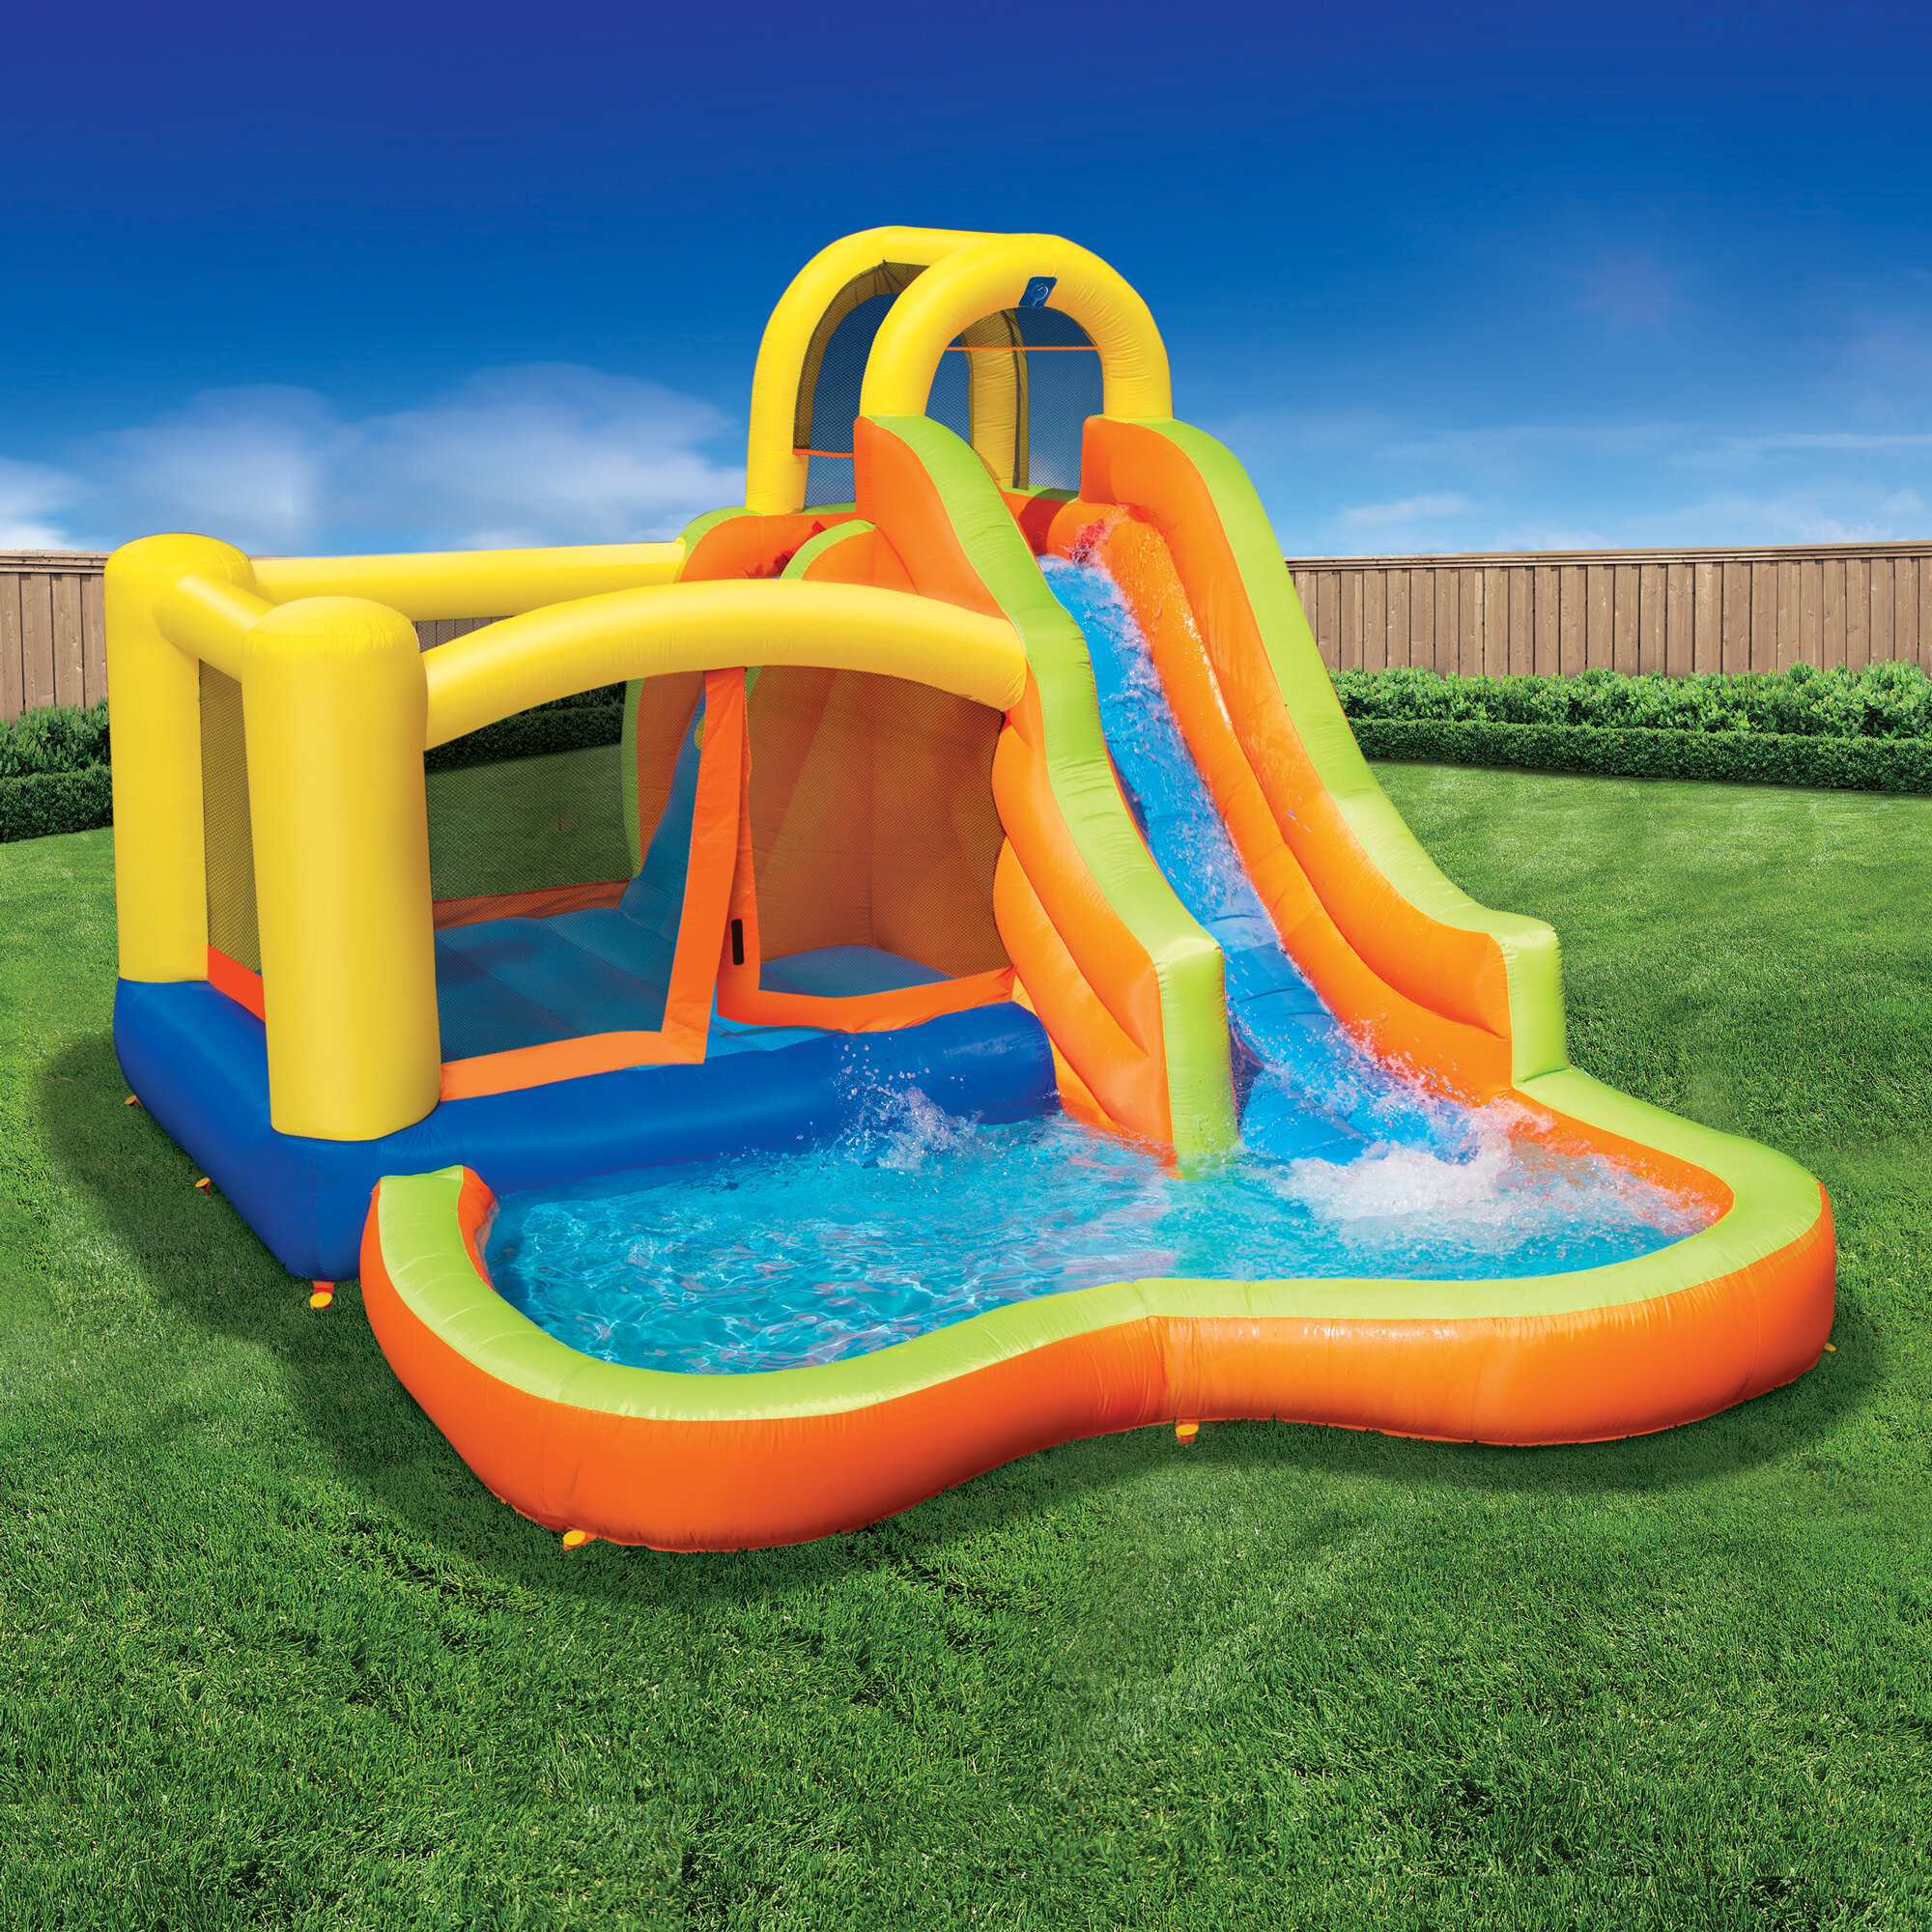 Two Slides & Splash Pool Includes Blower Motor Inflatable Water Slide Well Fun Bounce House with Climbing Wall 